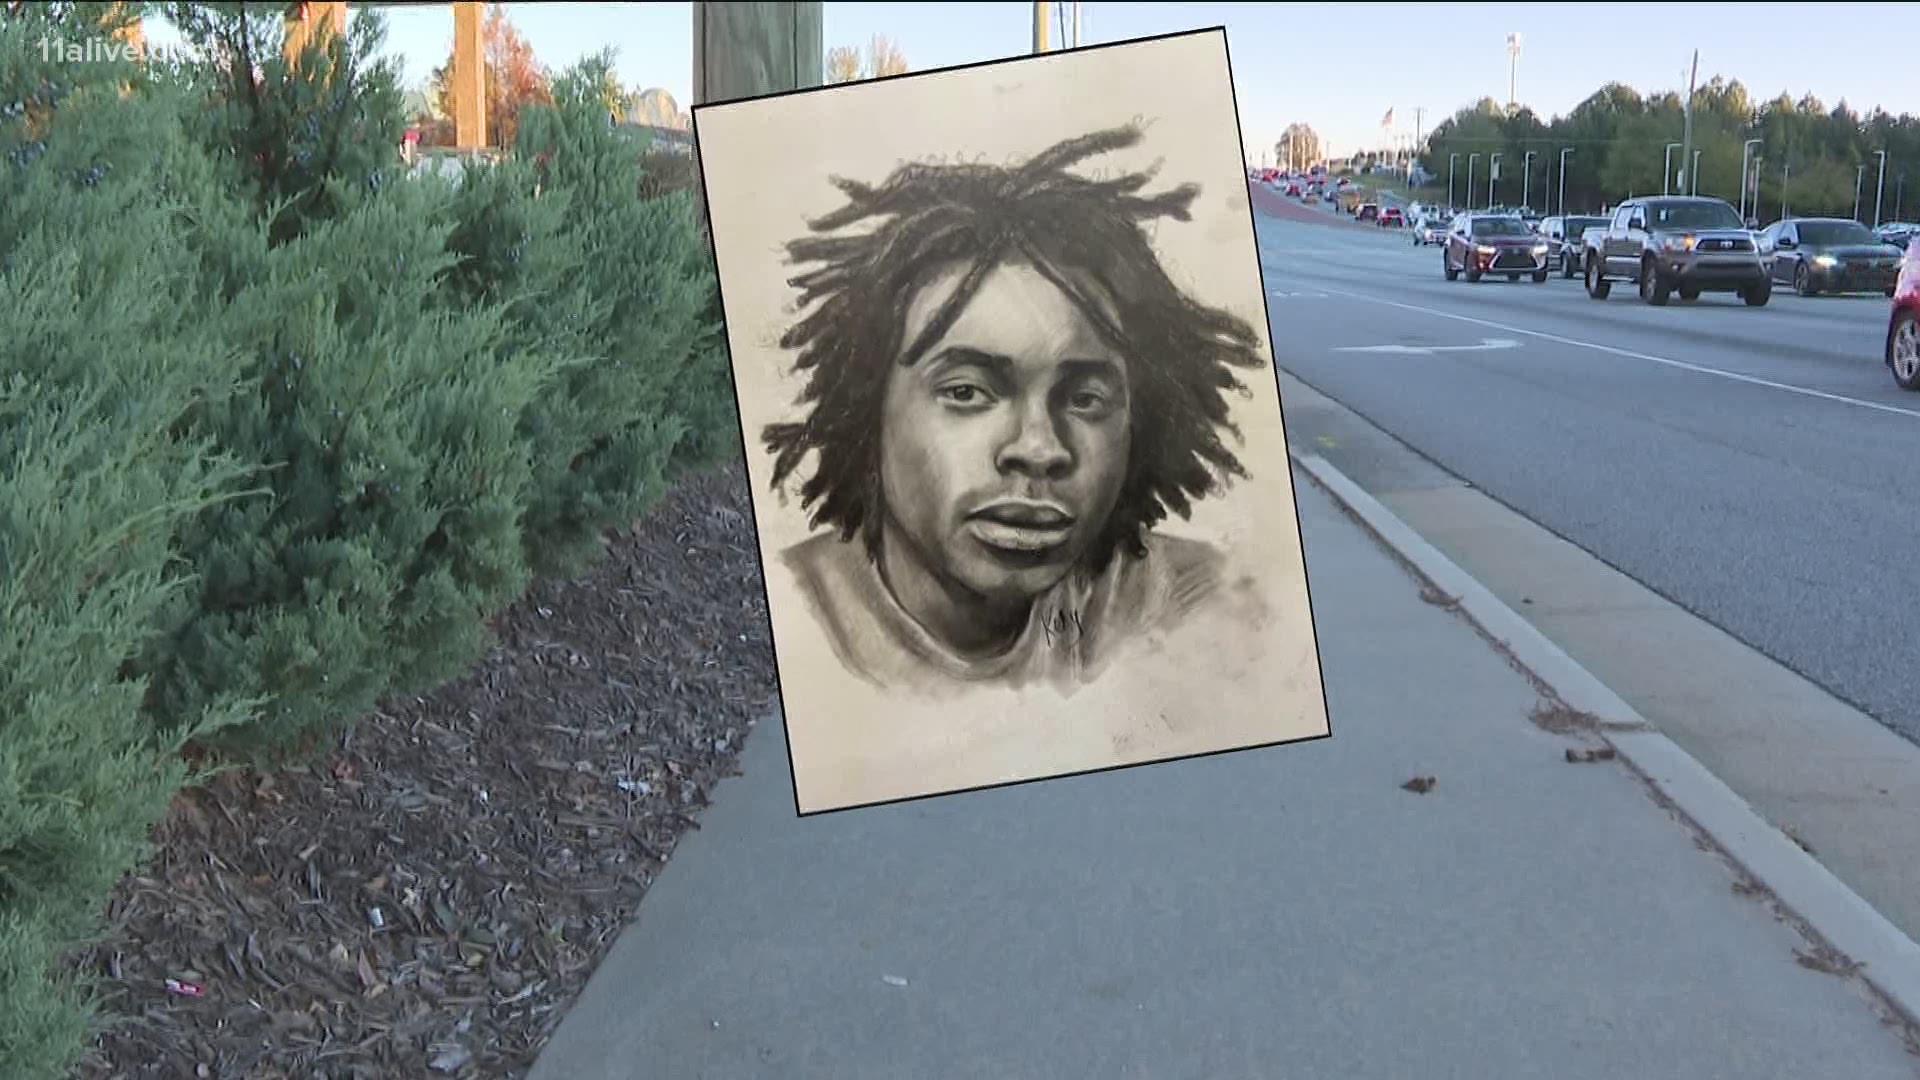 Police in Gwinnett County have released a sketch of a man they believe violently raped a woman last month in Duluth.